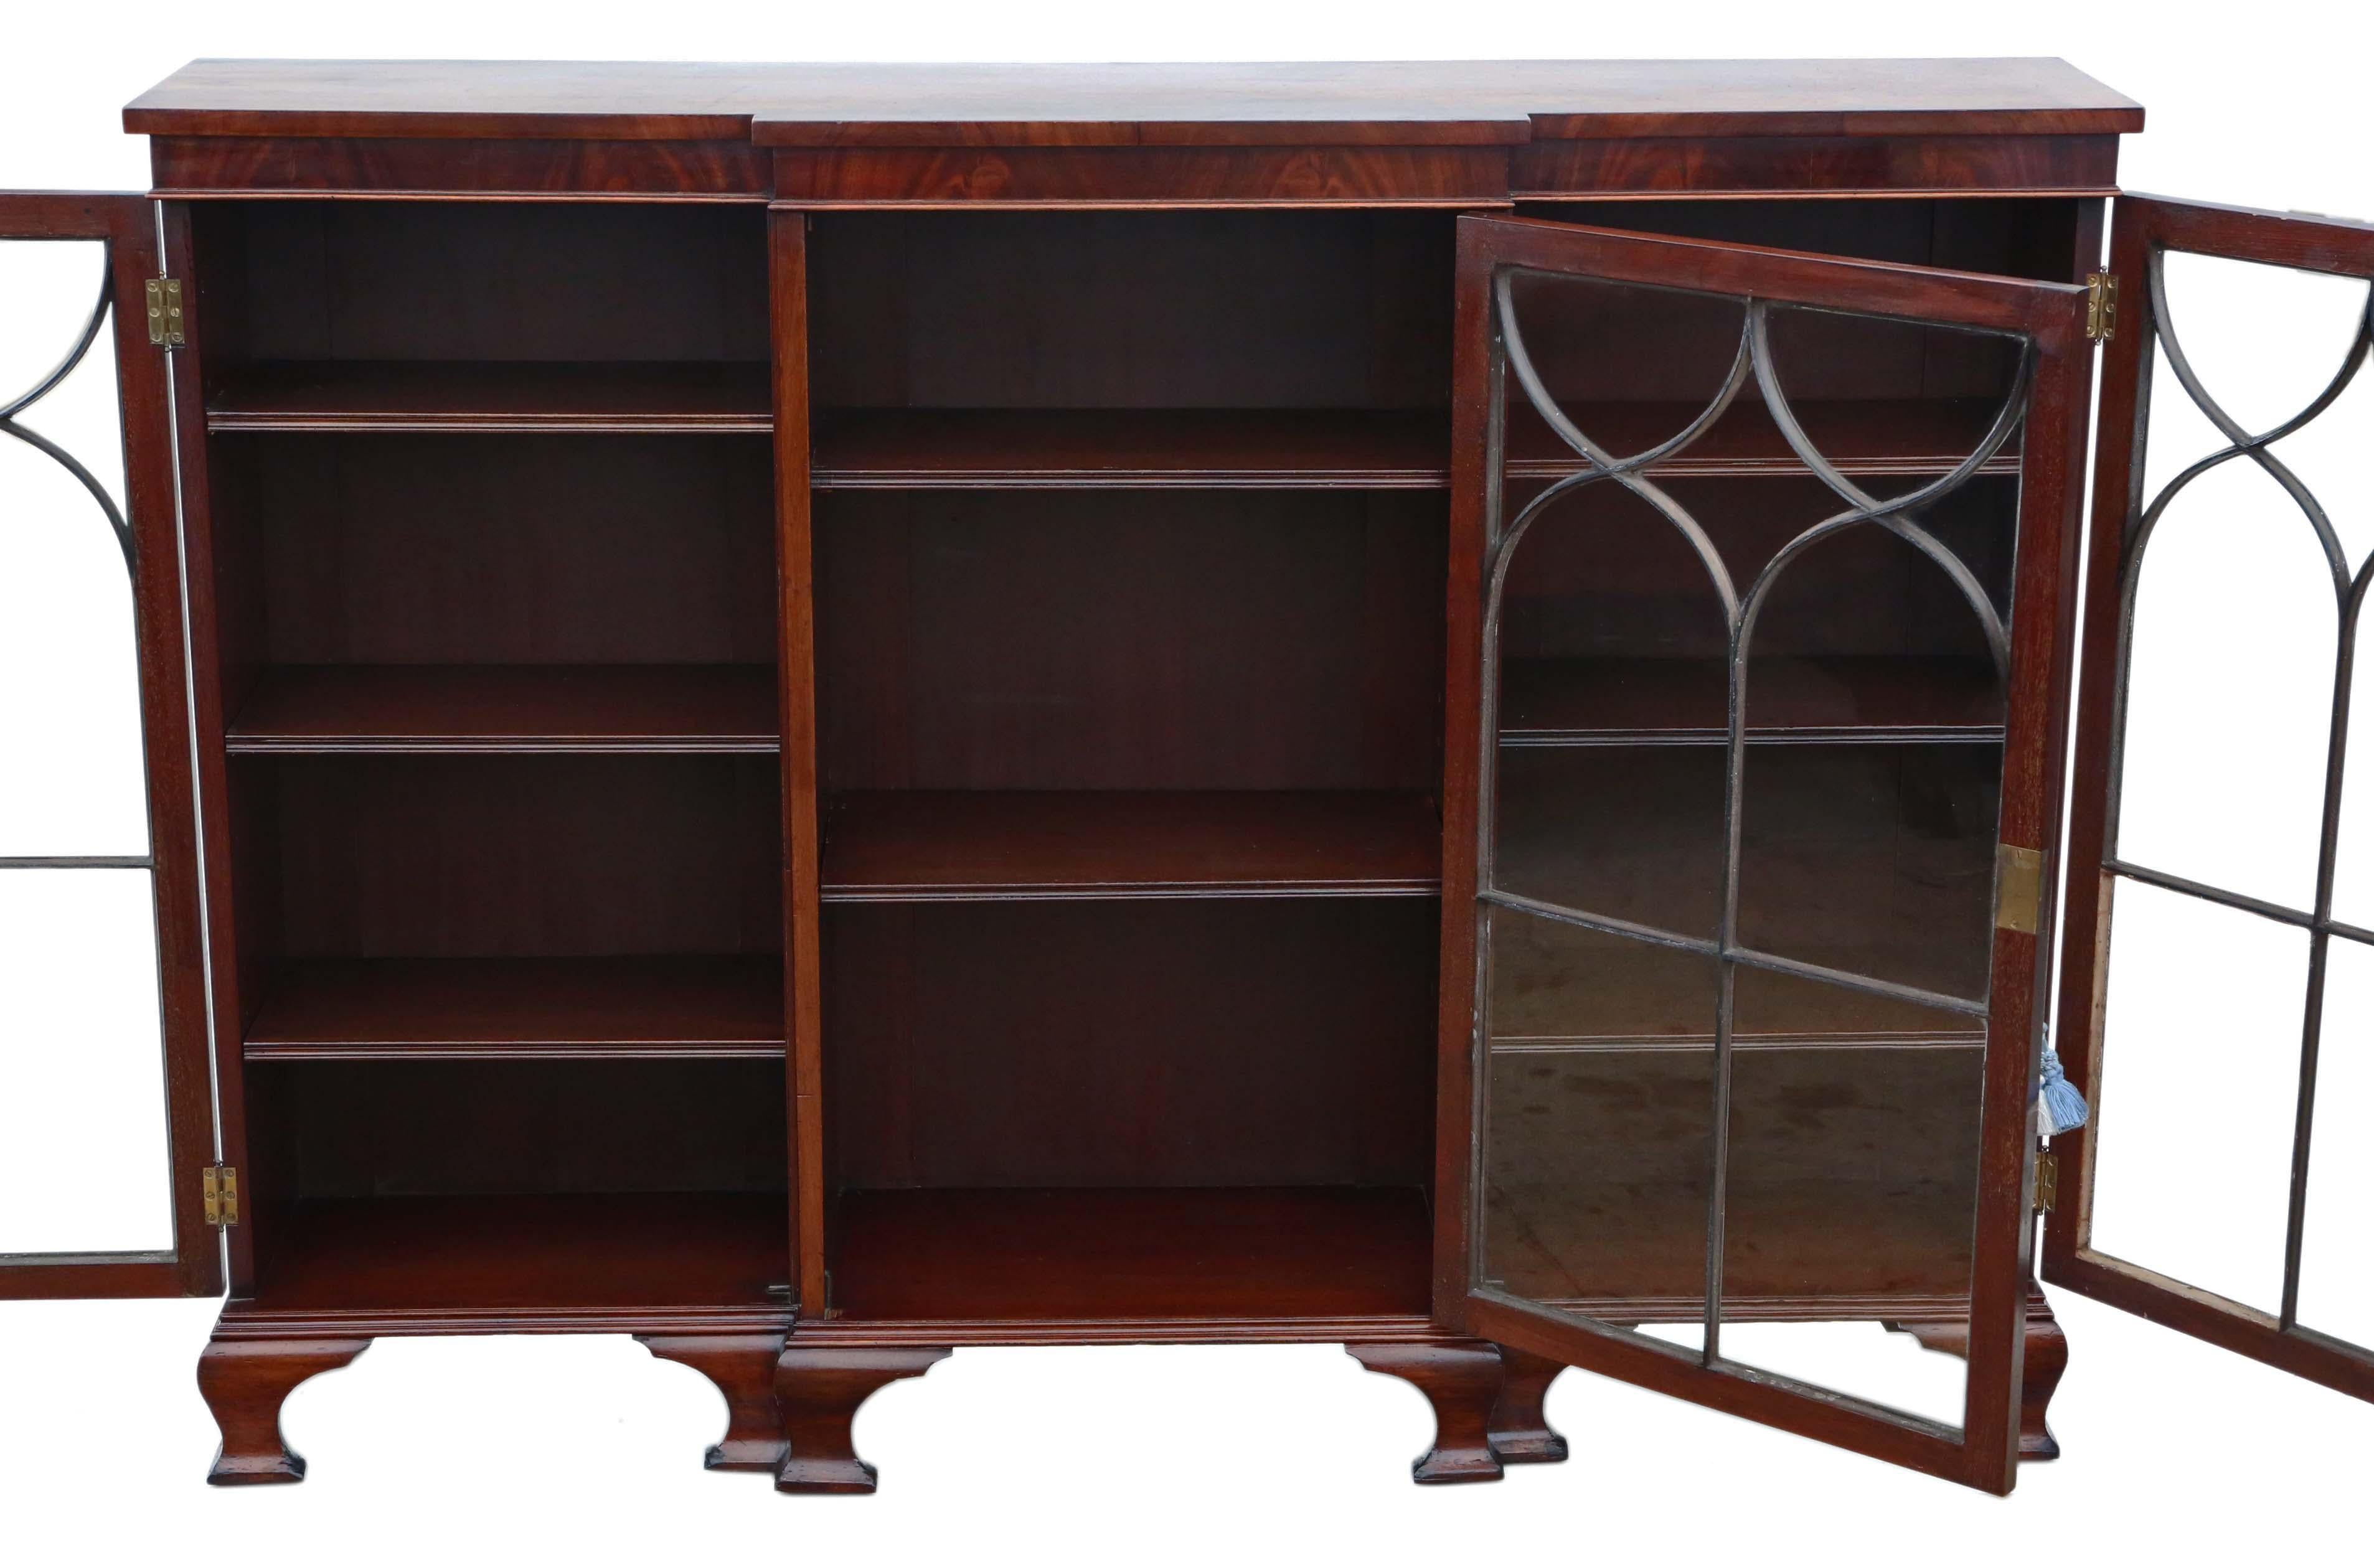 Antique fine quality Victorian 19th century mahogany adjustable glazed breakfront bookcase. We have a key.

Solid and strong, with no loose joints and no woodworm.

A fine quality piece of furniture that is far better than most. Attractive